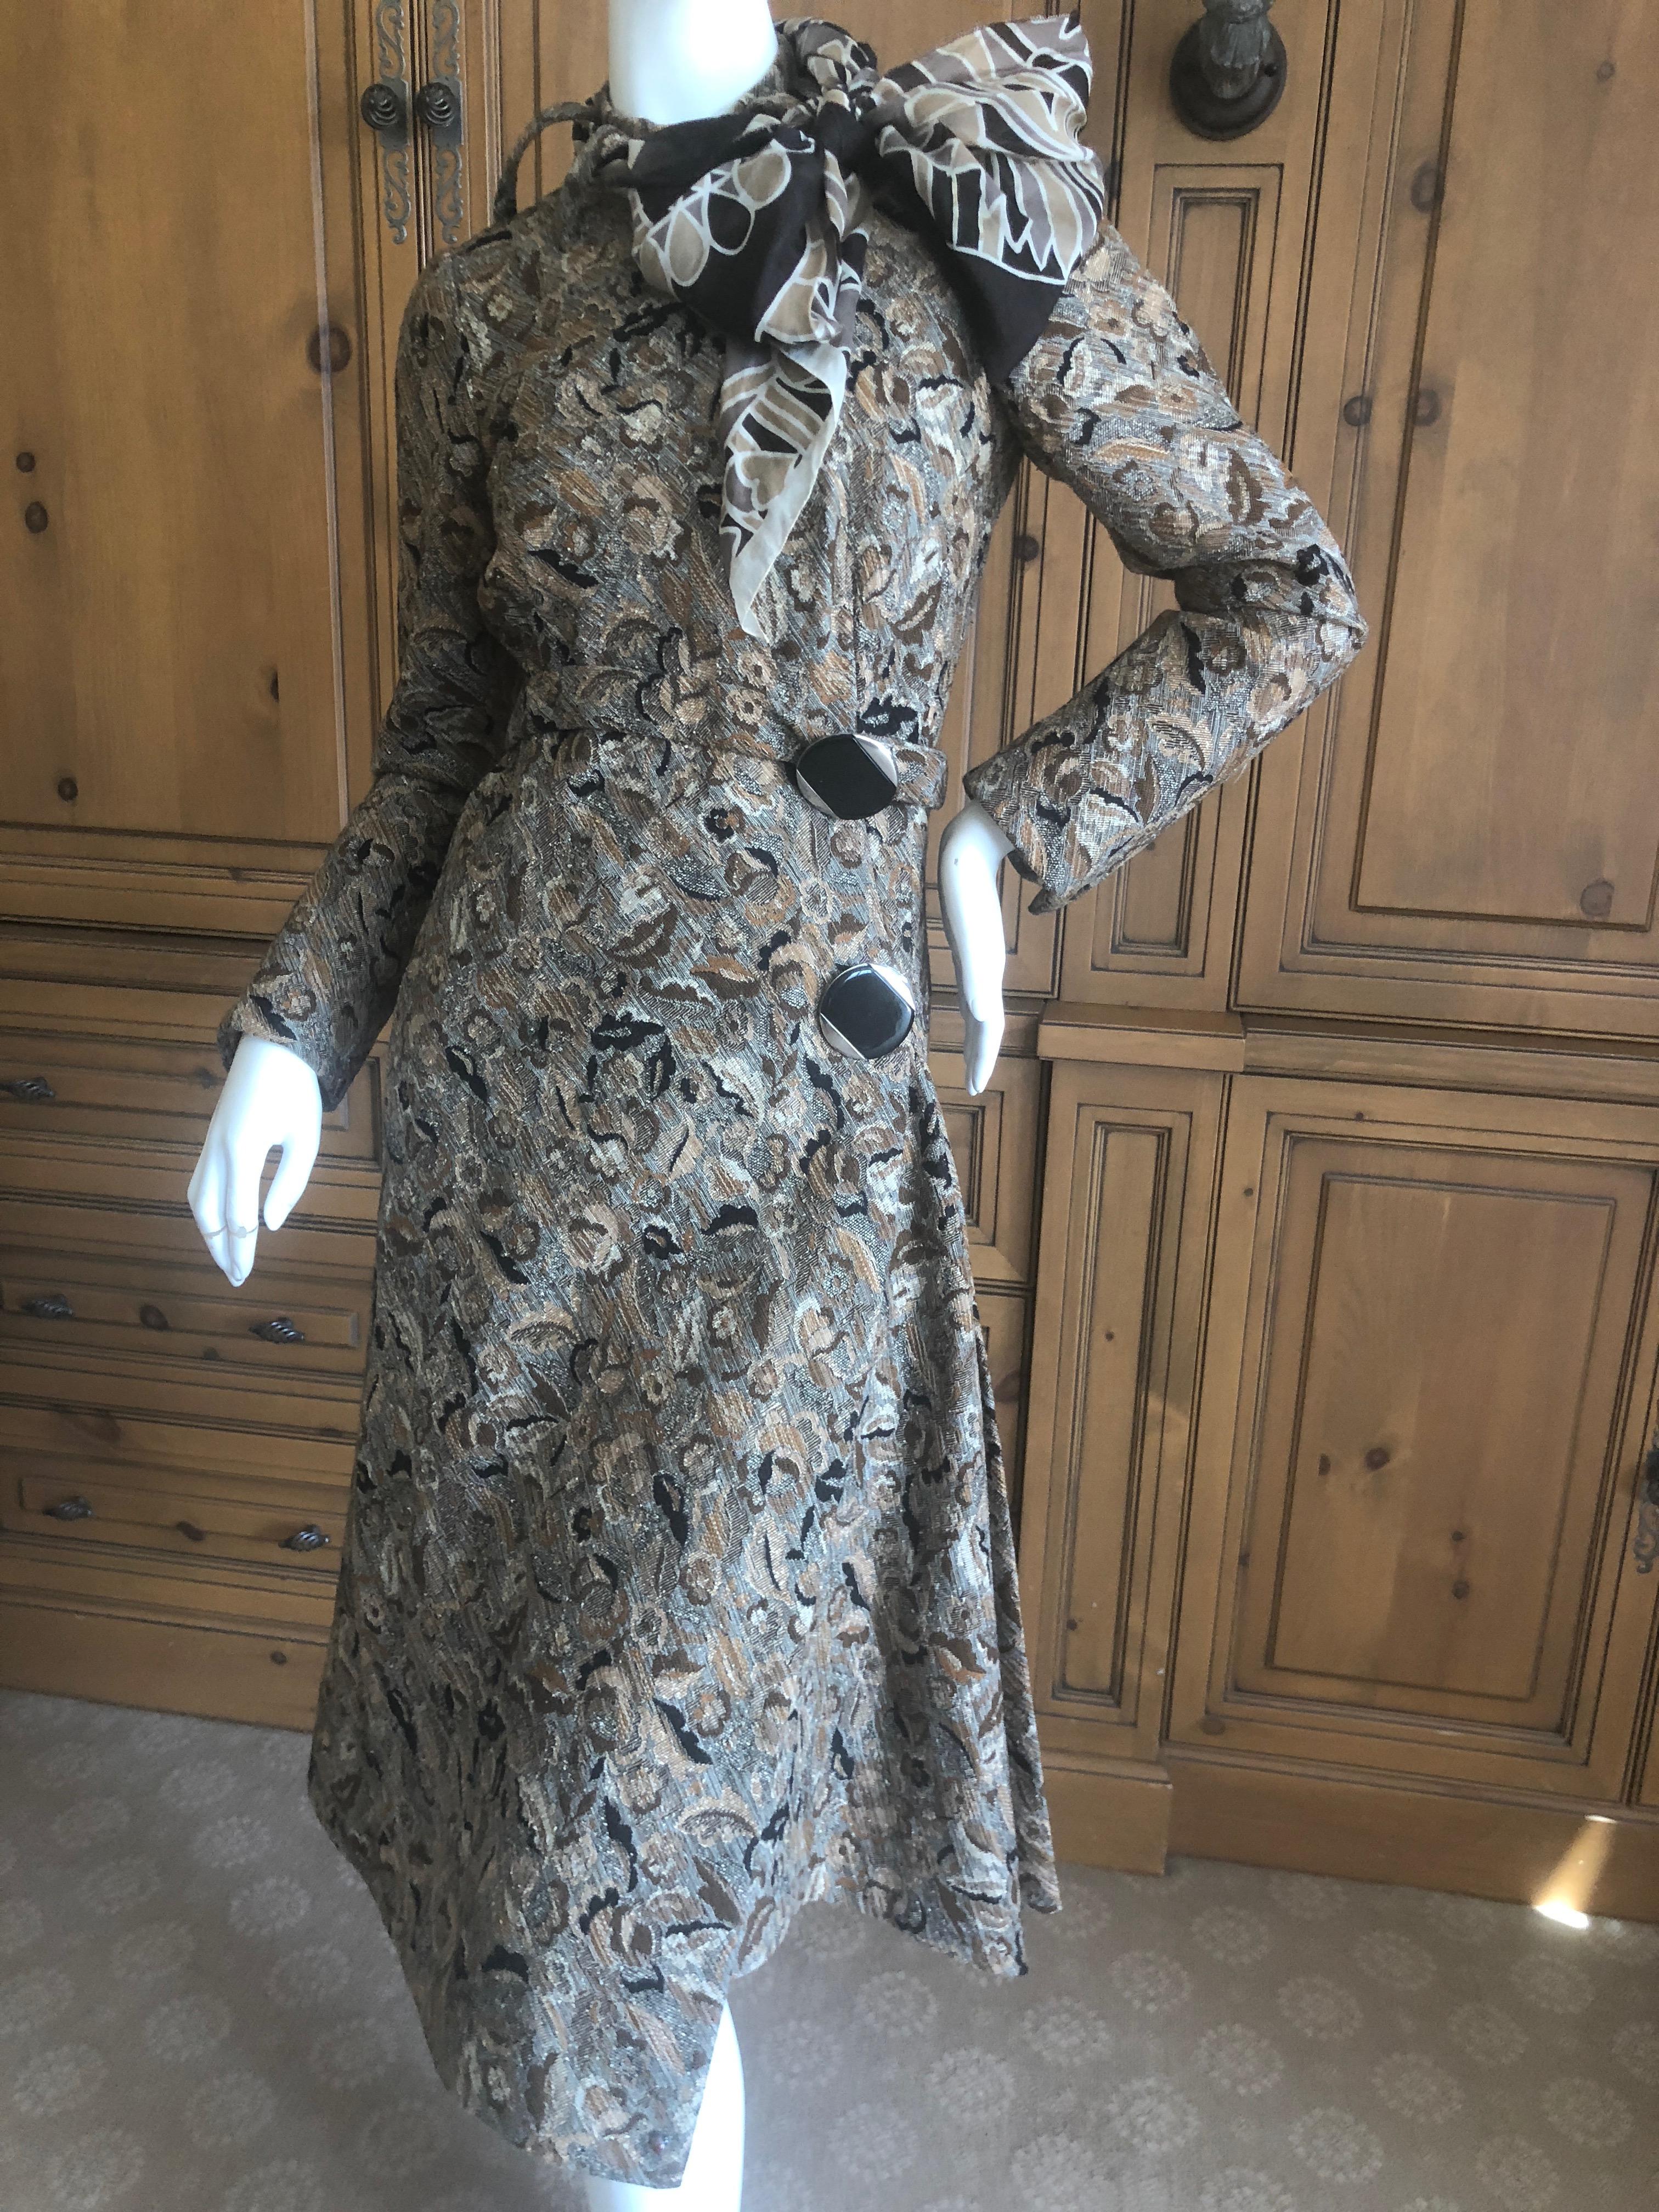 Cardinali Silk Brocade Evening Dress with Attached Scarf 1973 
From the Archive of Marilyn Lewis, the creator of Cardinali
Cardinali was founded in Los Angeles in 1970, by Marilyn Lewis, who had already found success as the founder and owner of the